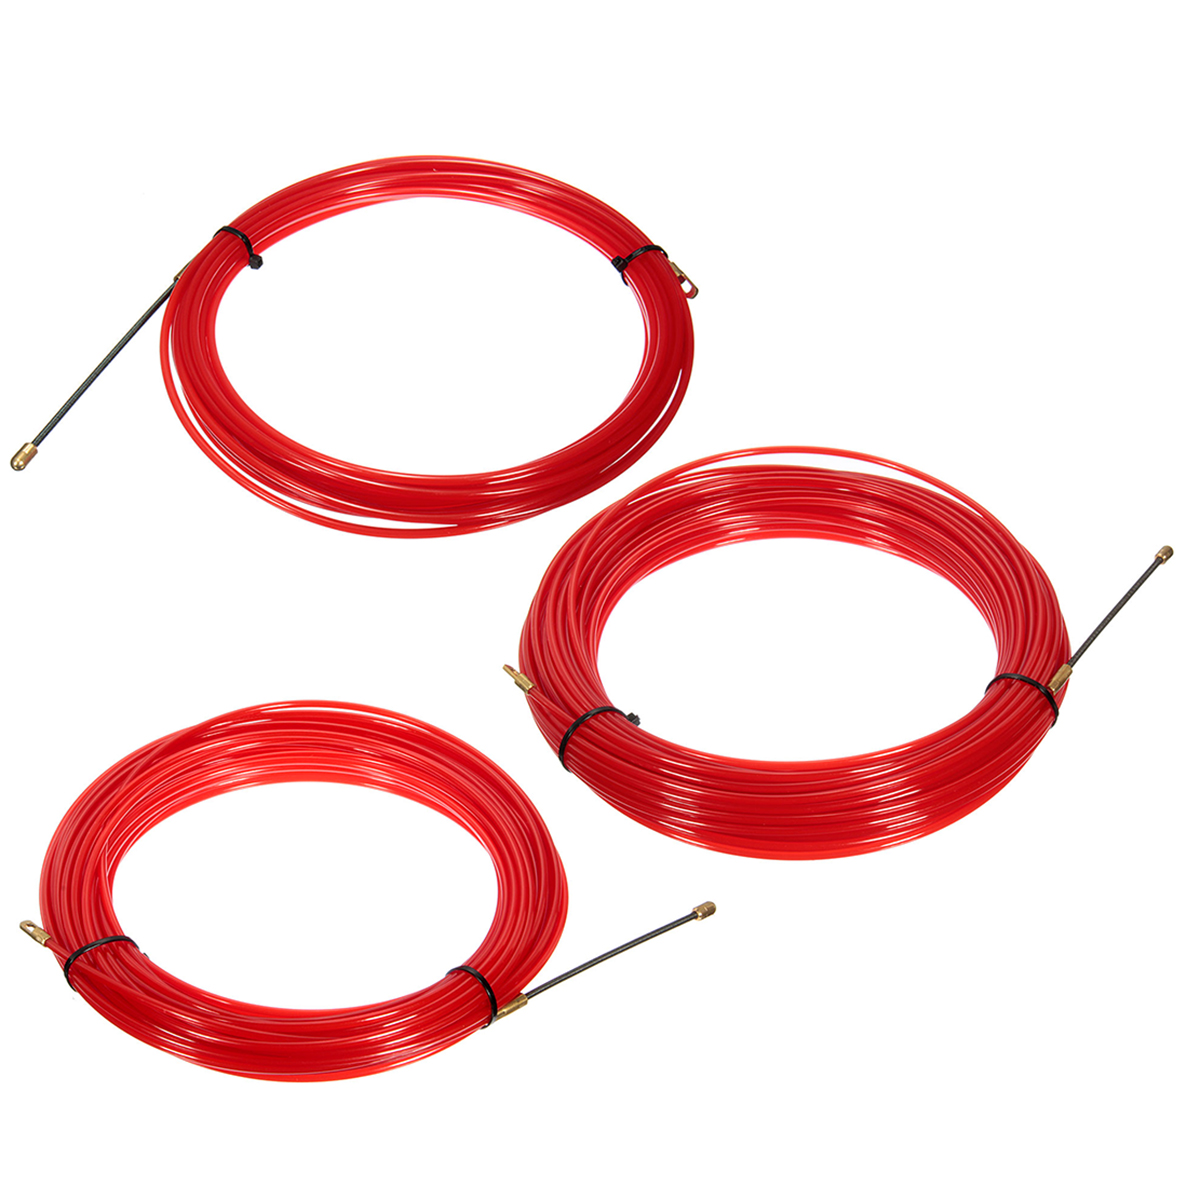 10-30M-Nylon-Fish-Draw-Tape-Electrical-Cable-Puller-Pulling-Electricians-Wheel-1202564